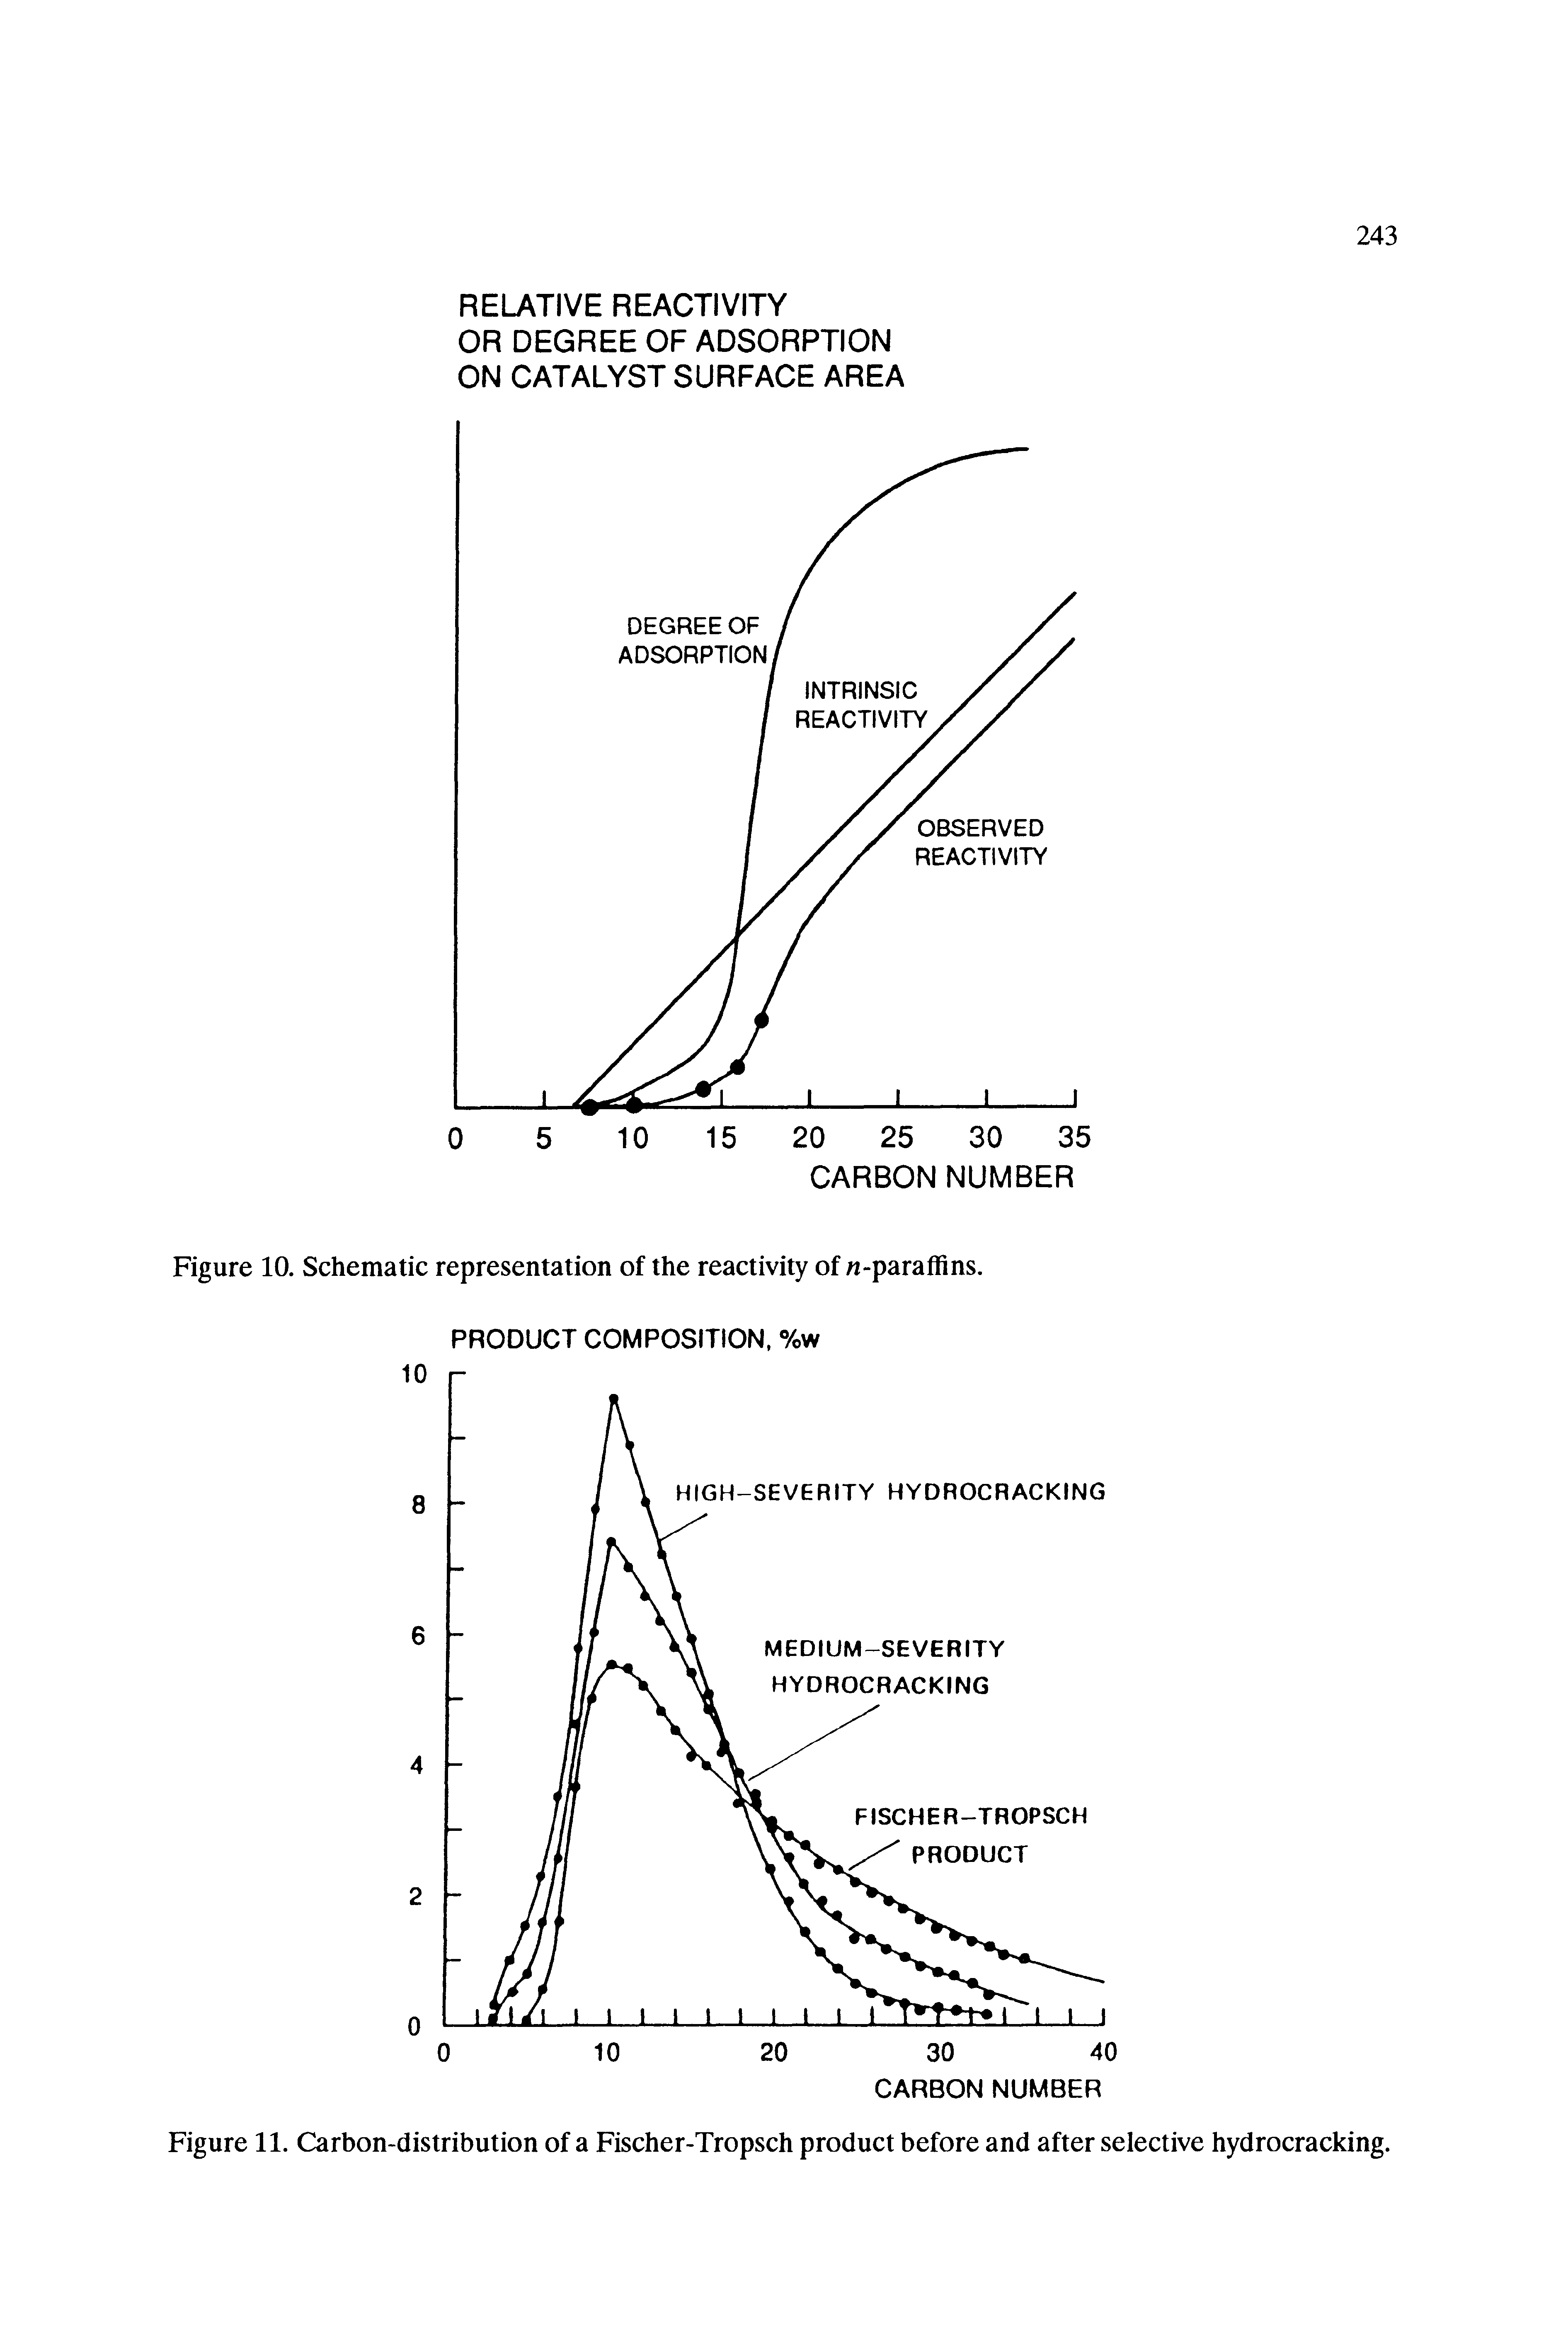 Figure 11. Carbon-distribution of a Fischer-Tropsch product before and after selective hydrocracking.